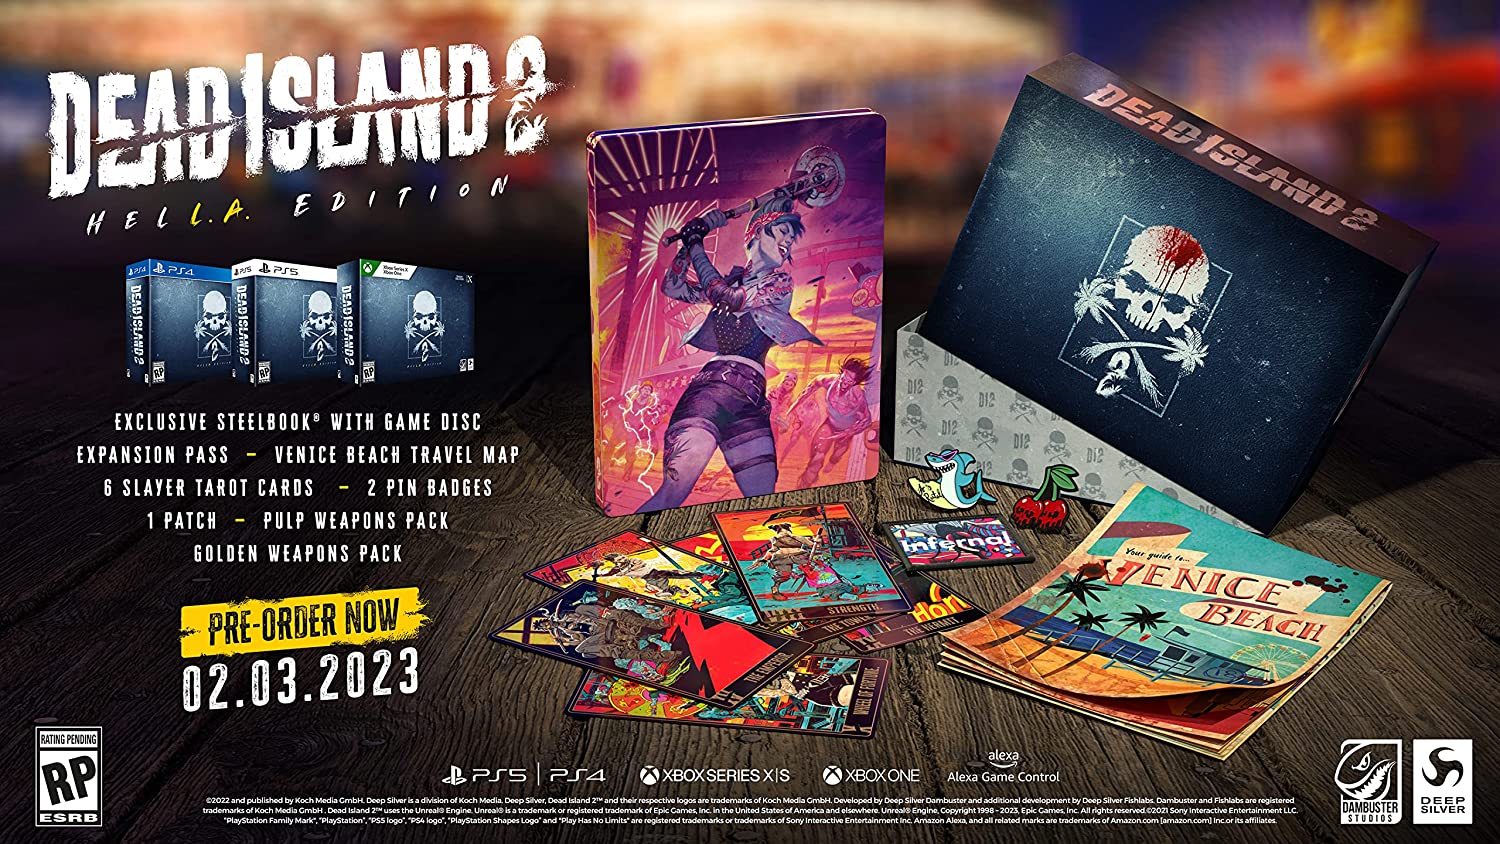 The dead island 2 collectors pack.